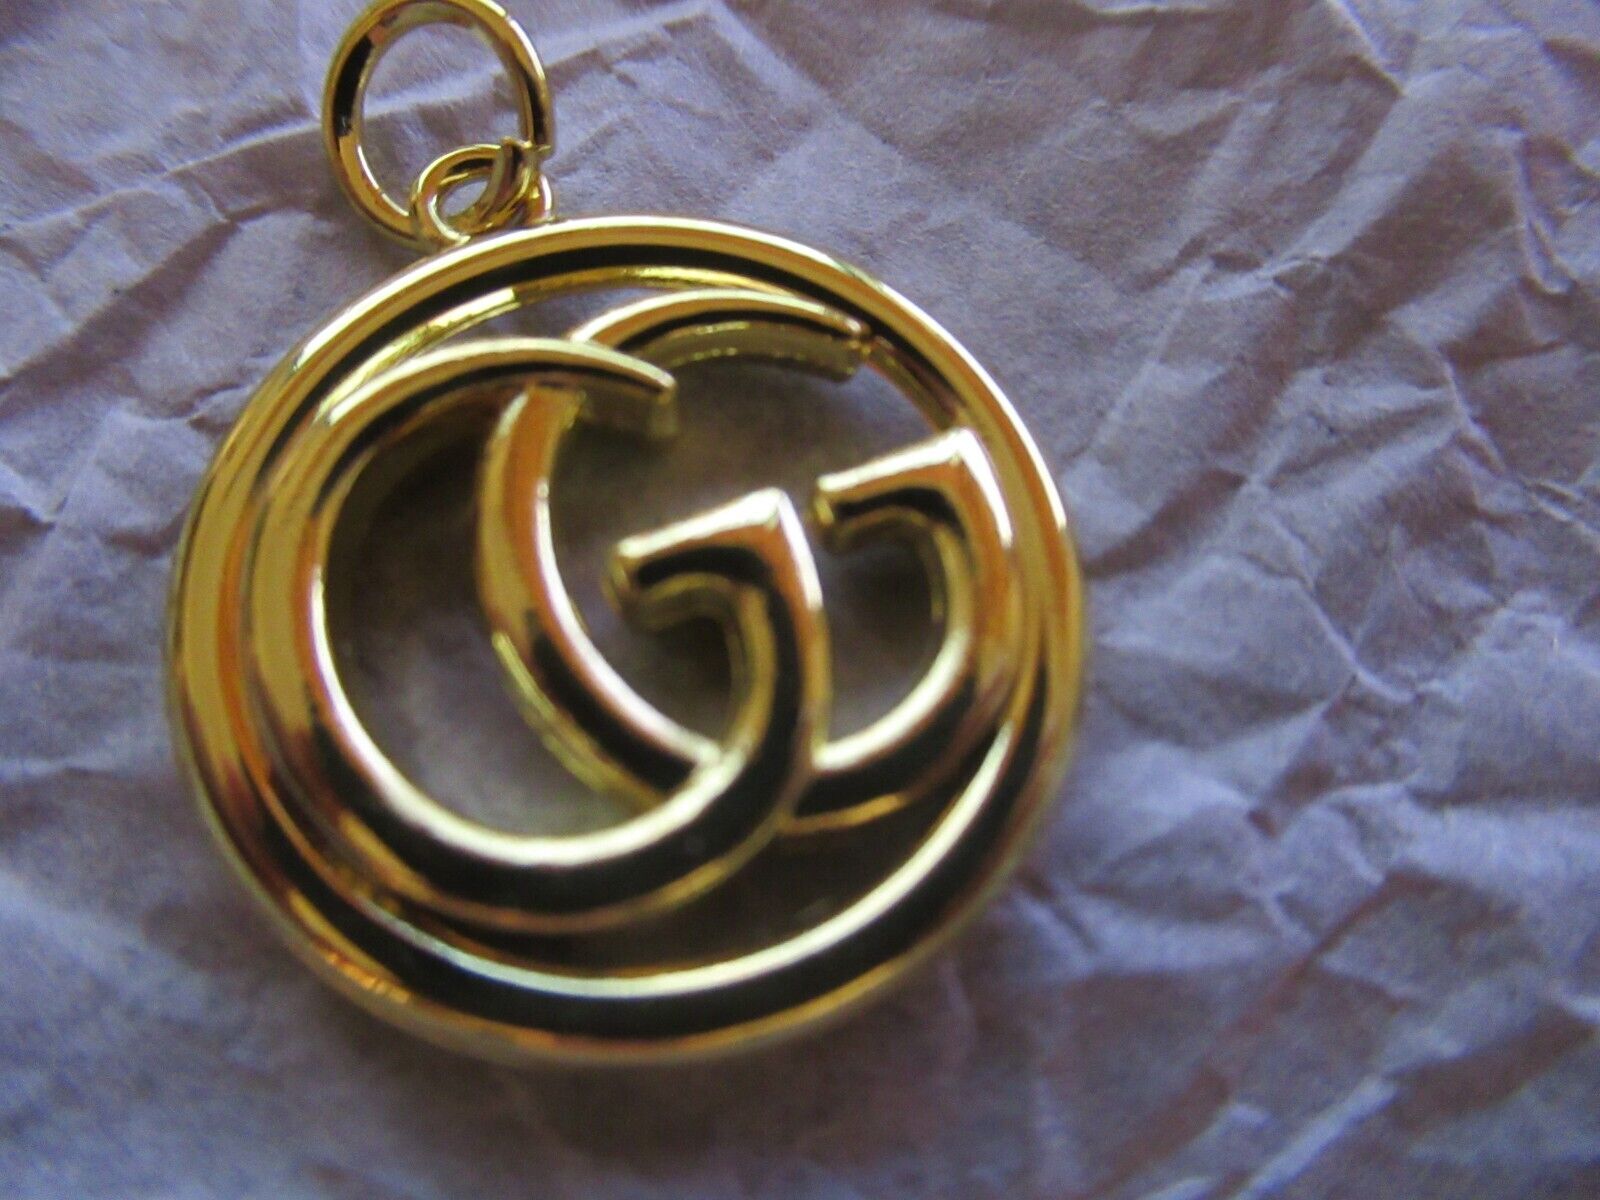 GUCCI 2 ZIP PULL  CHARM 26X23MM gold tone,  METAL  THIS IS FOR 2